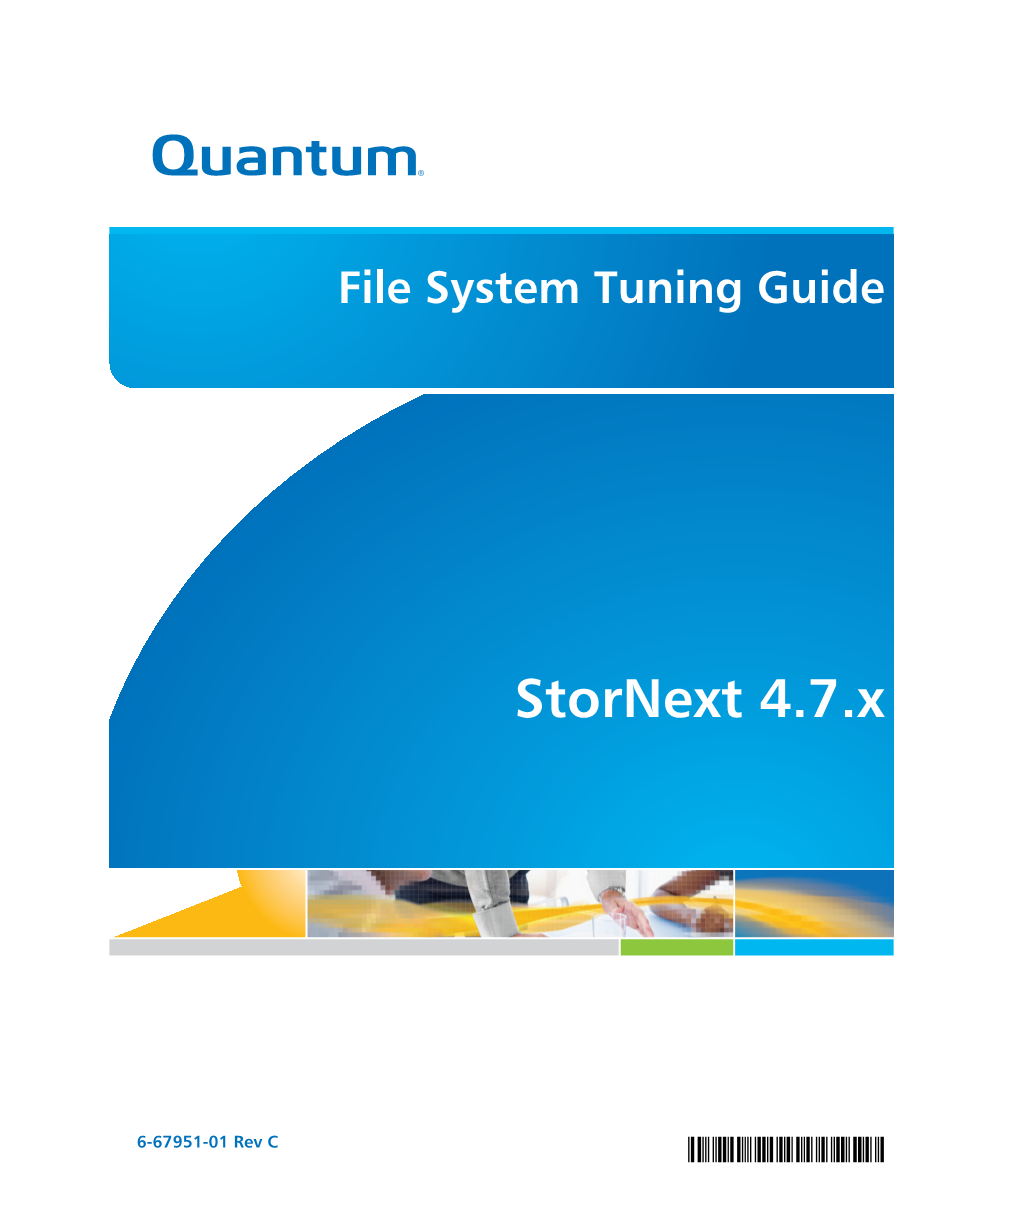 6-67951-01 Stornext 4.7.X File System Tuning Guide Rev. C